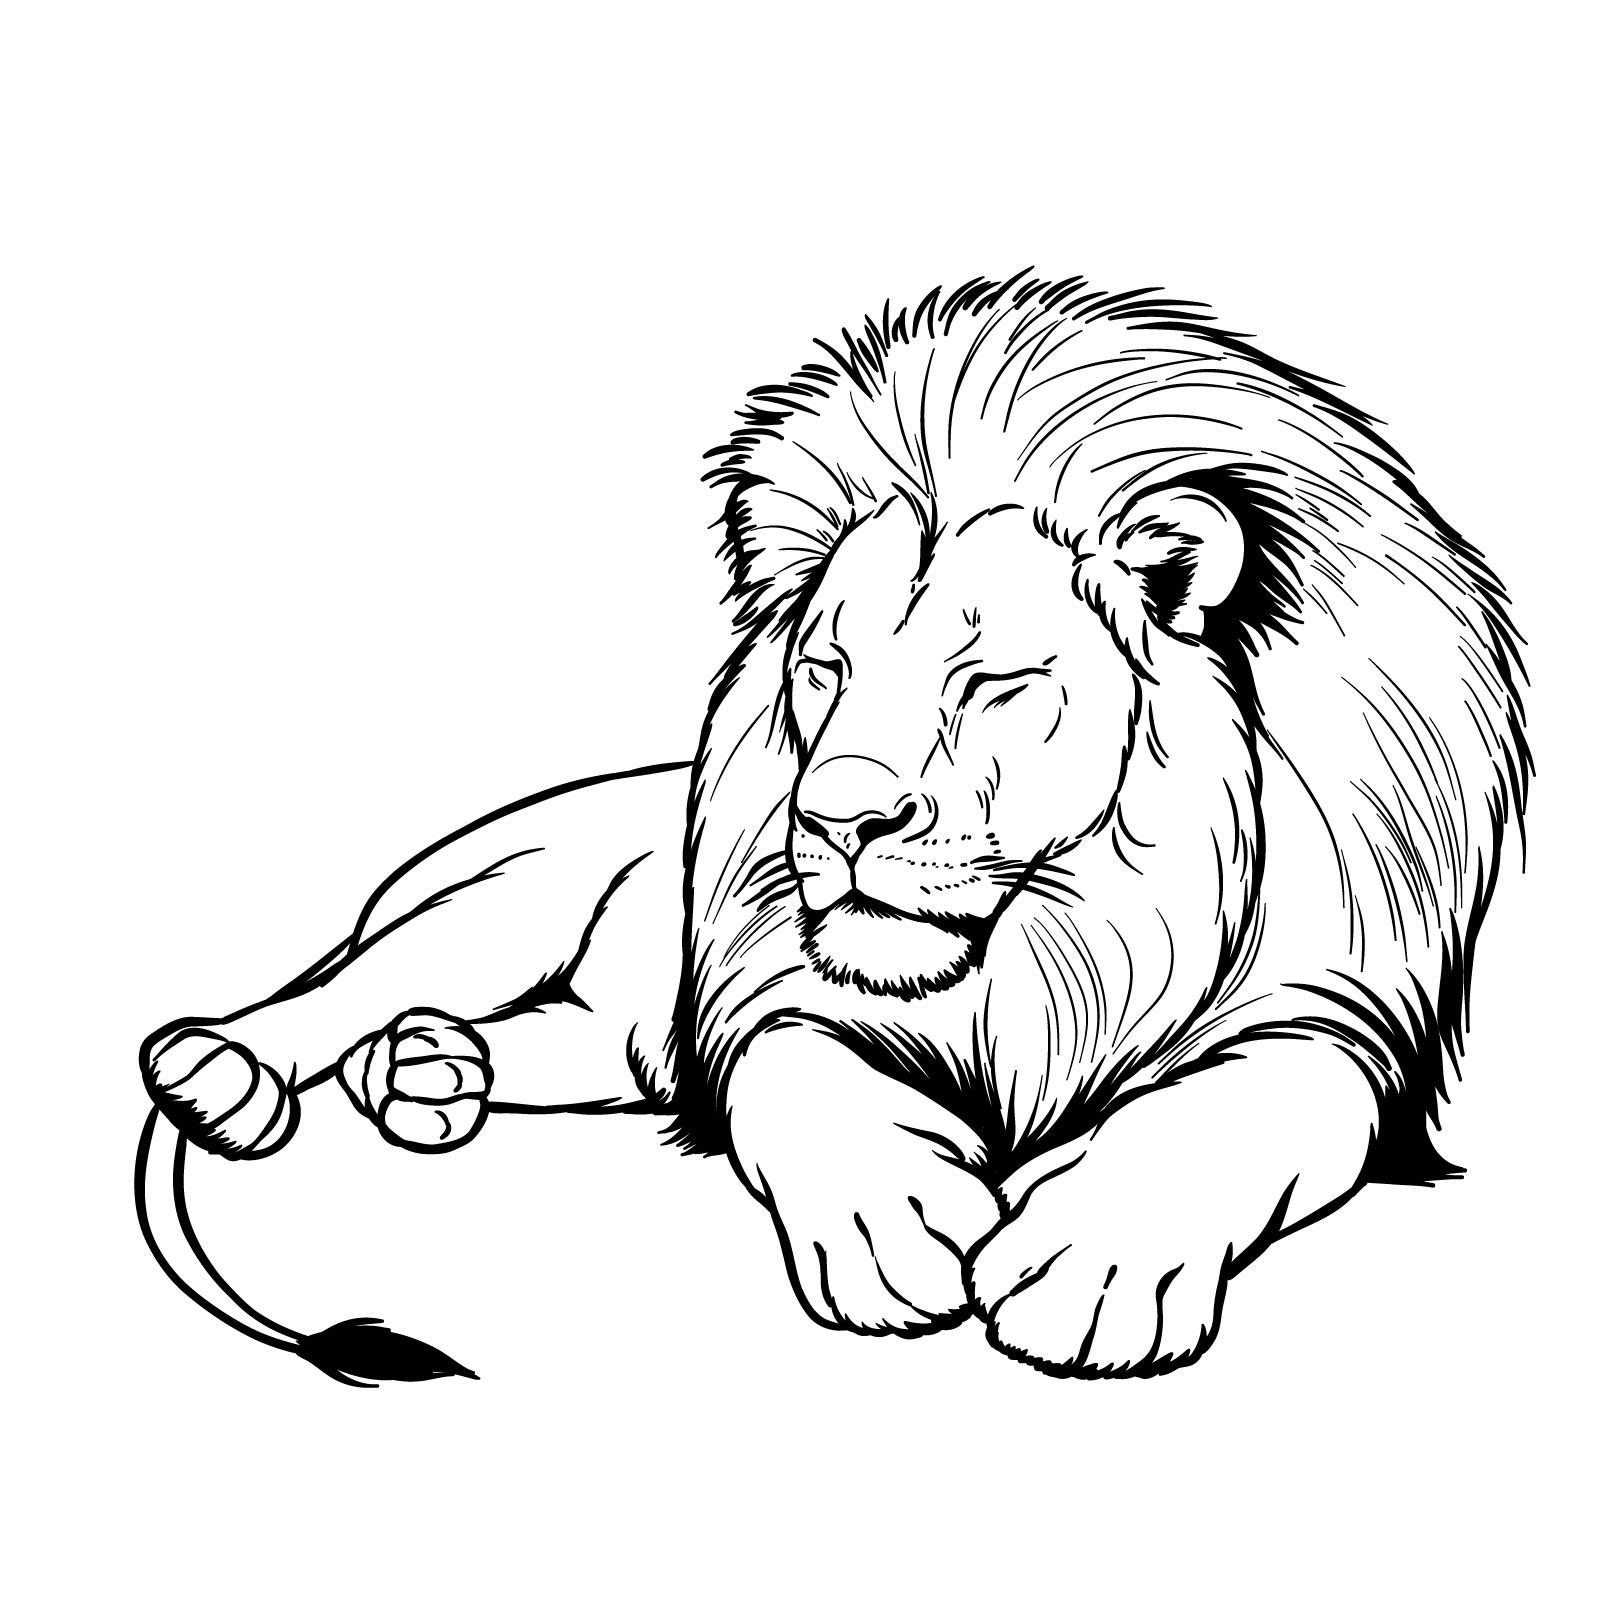 Sleeping lion drawing - front view drawing tutorial